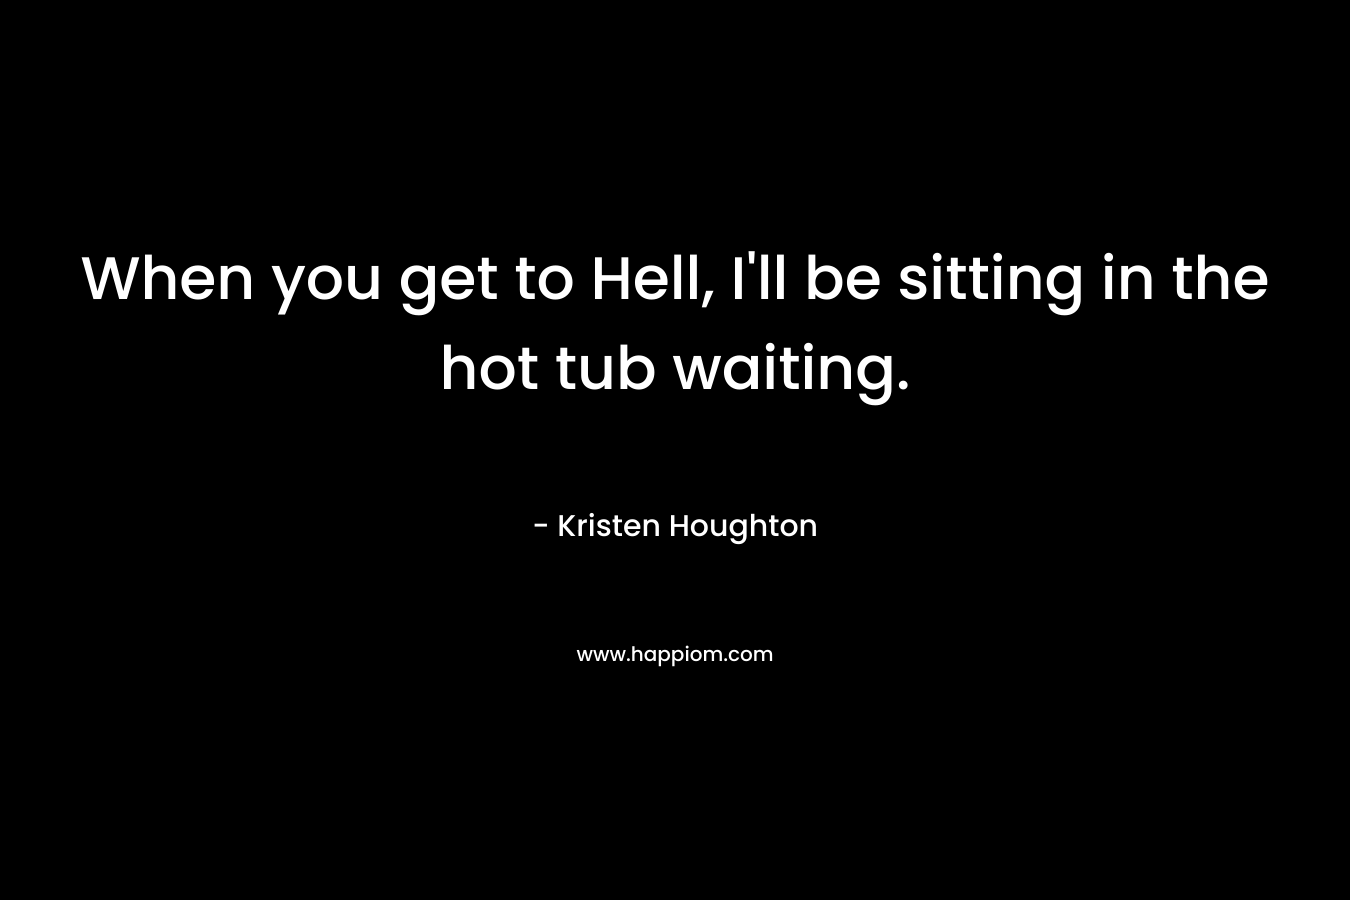 When you get to Hell, I'll be sitting in the hot tub waiting.